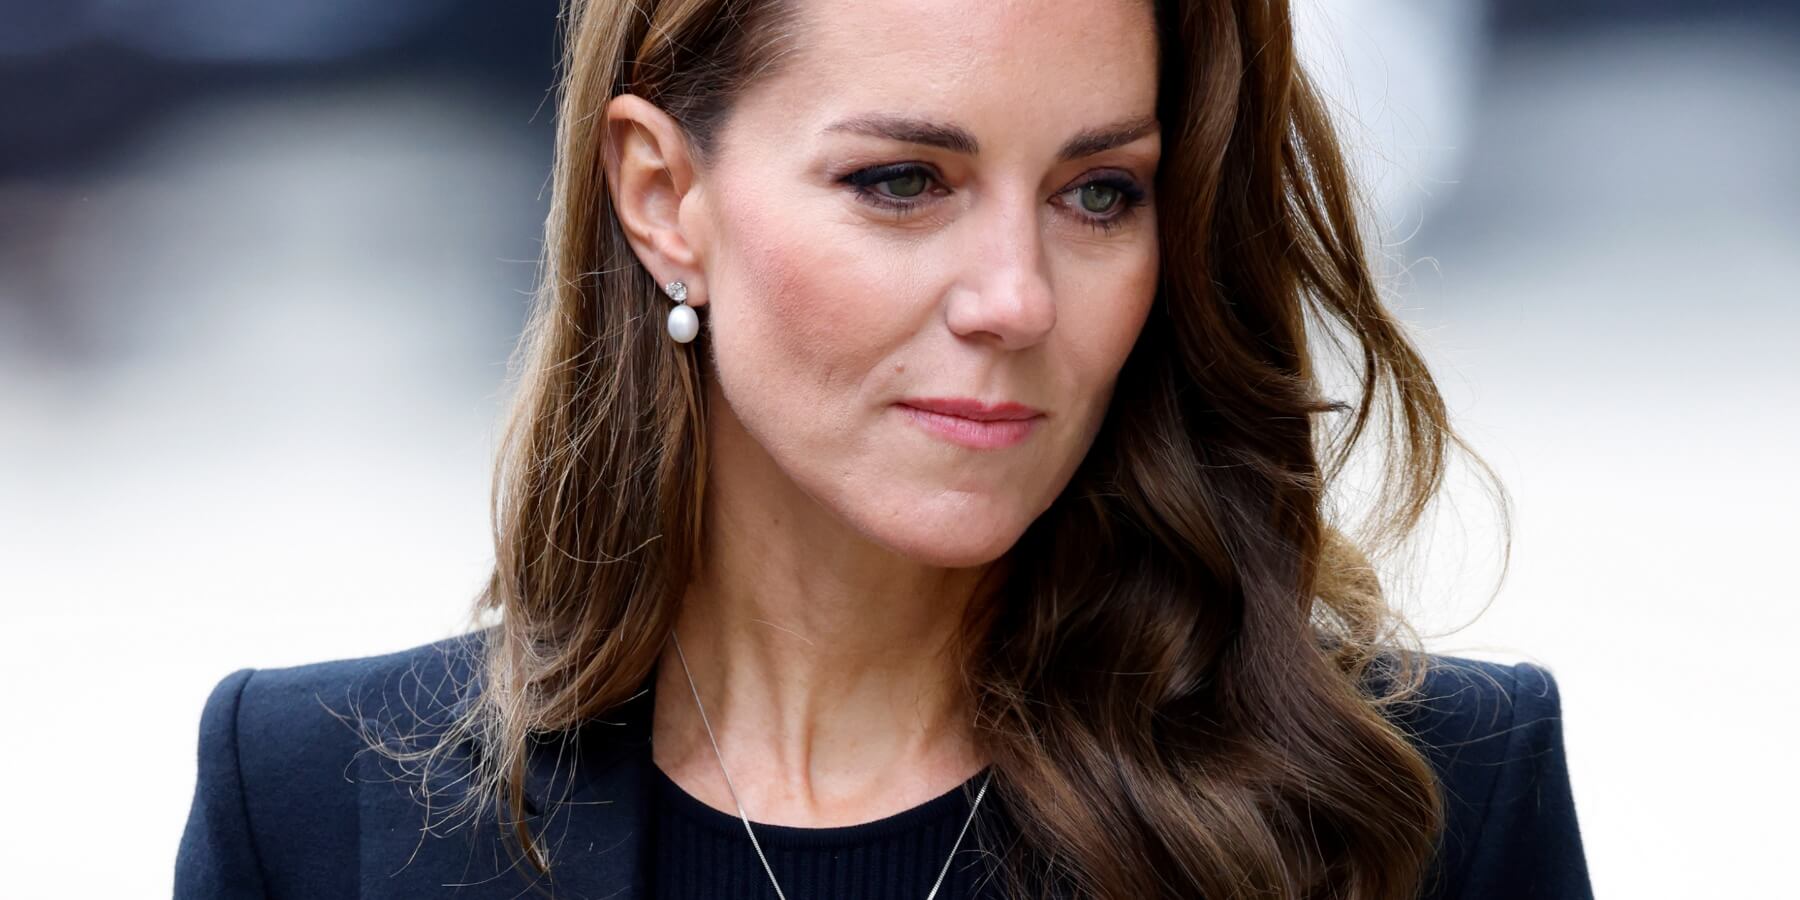 Until Kate Middleton came along, royal wives only had two important roles within the House of Windsor.